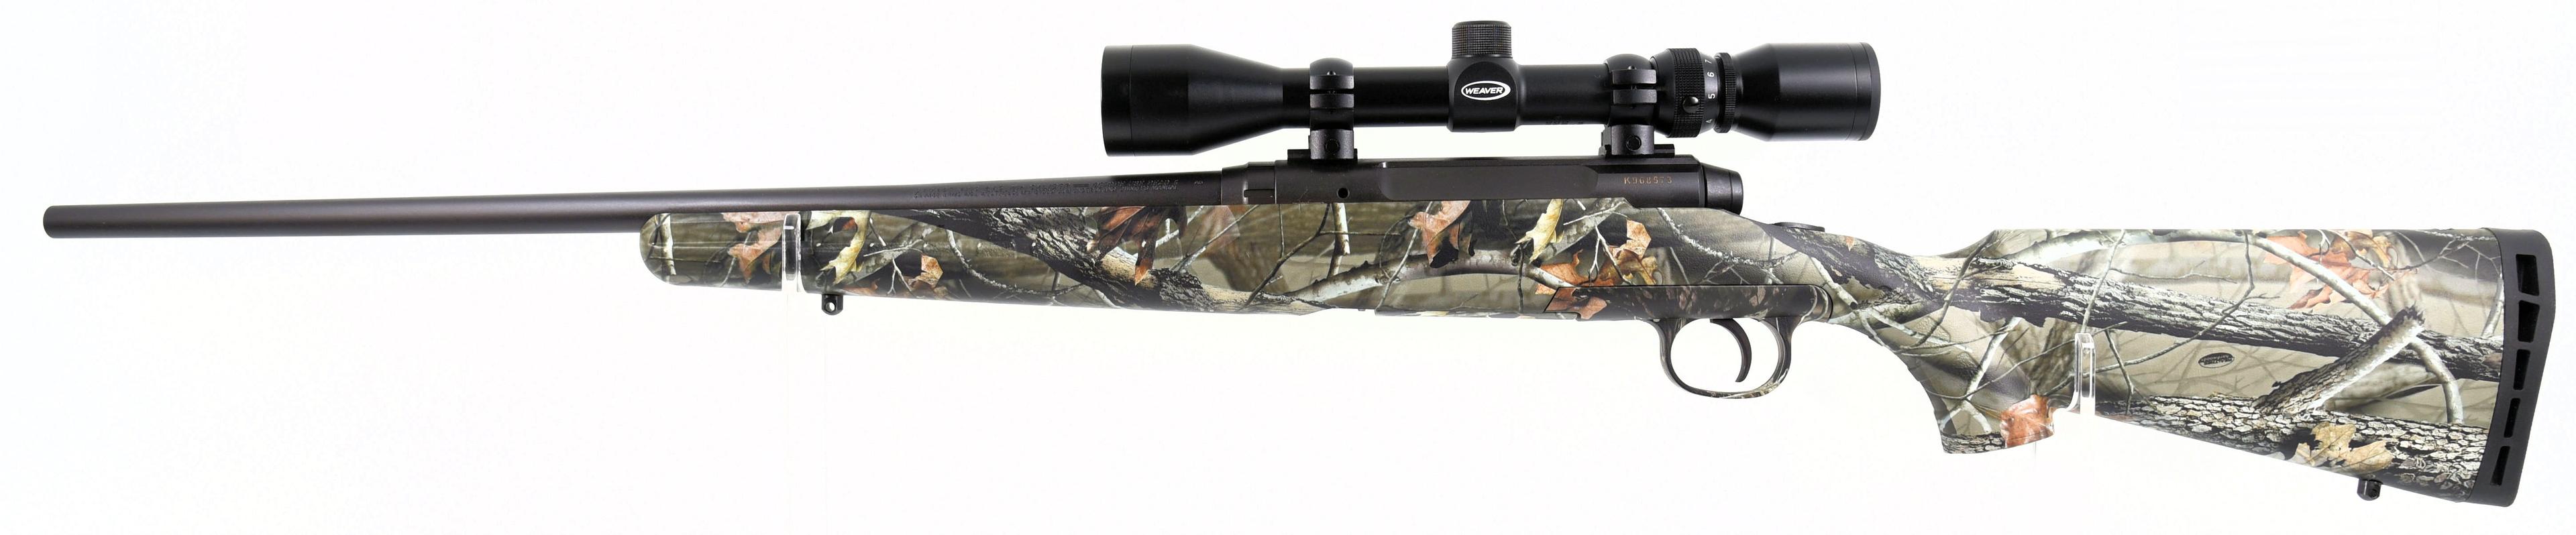 SAVAGE ARMS INC AXIS Bolt Action Rifle .243 Win